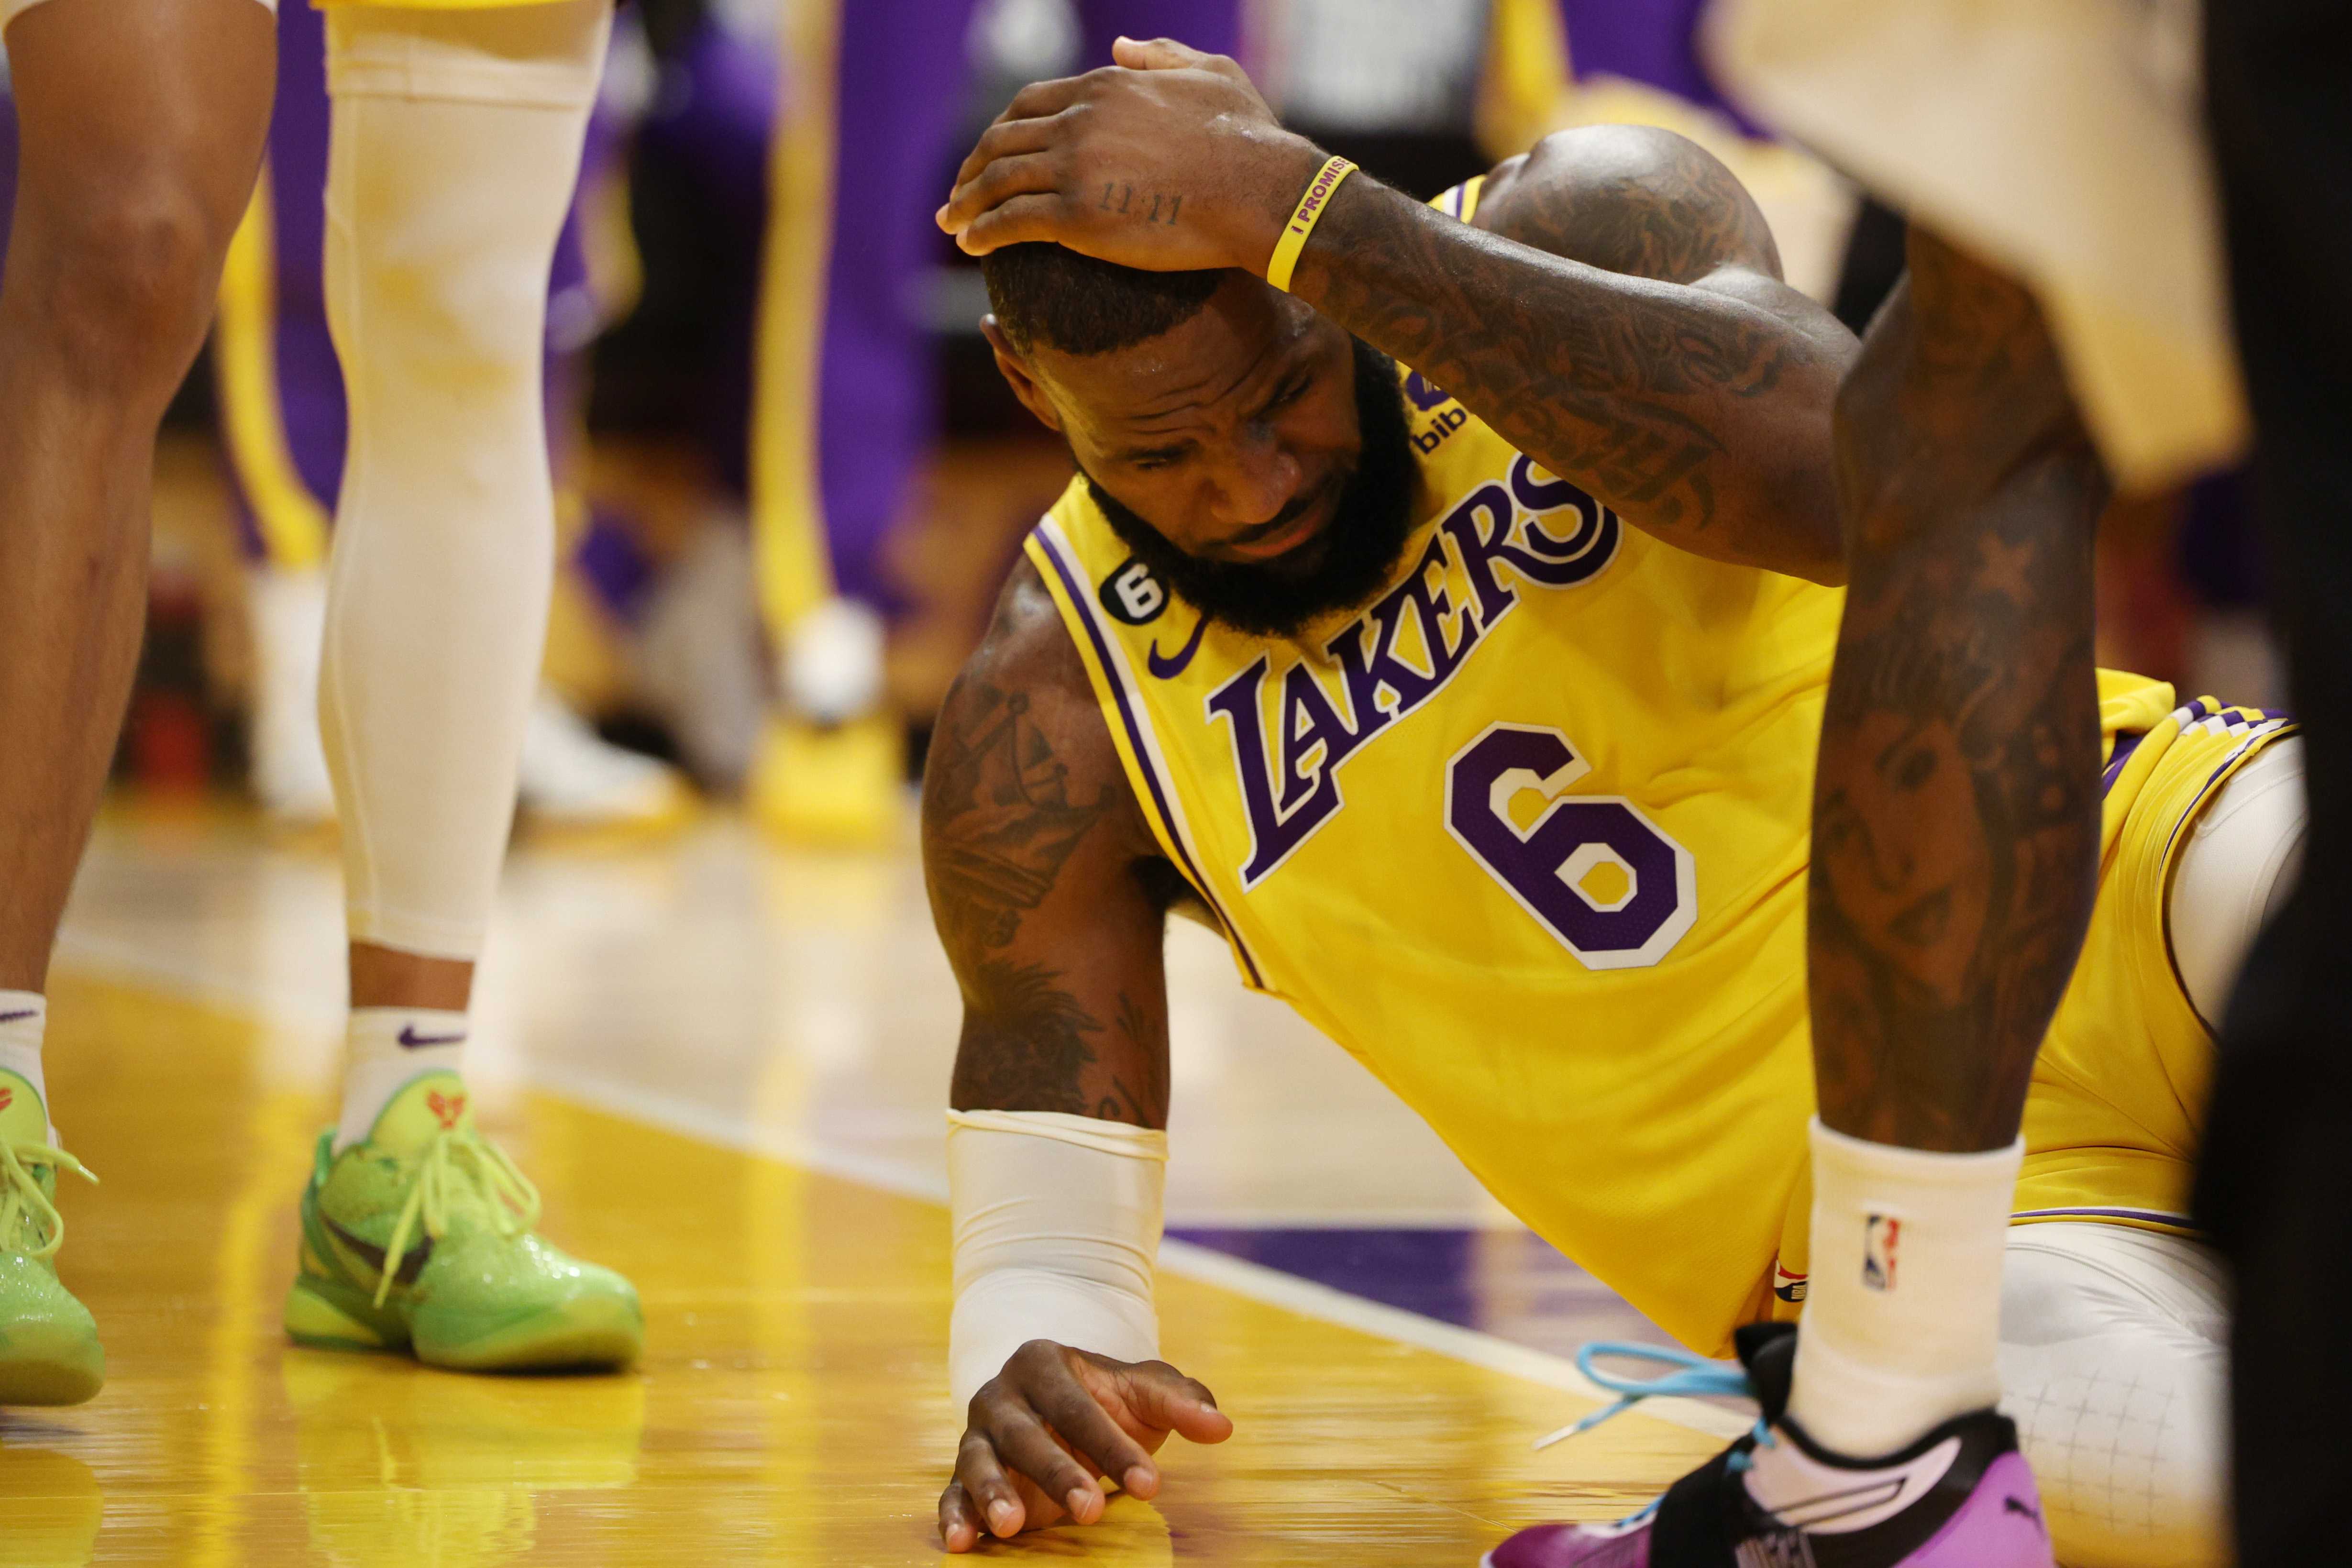 LeBron James: 'I'll be fine' after leaving All-Star game with injury